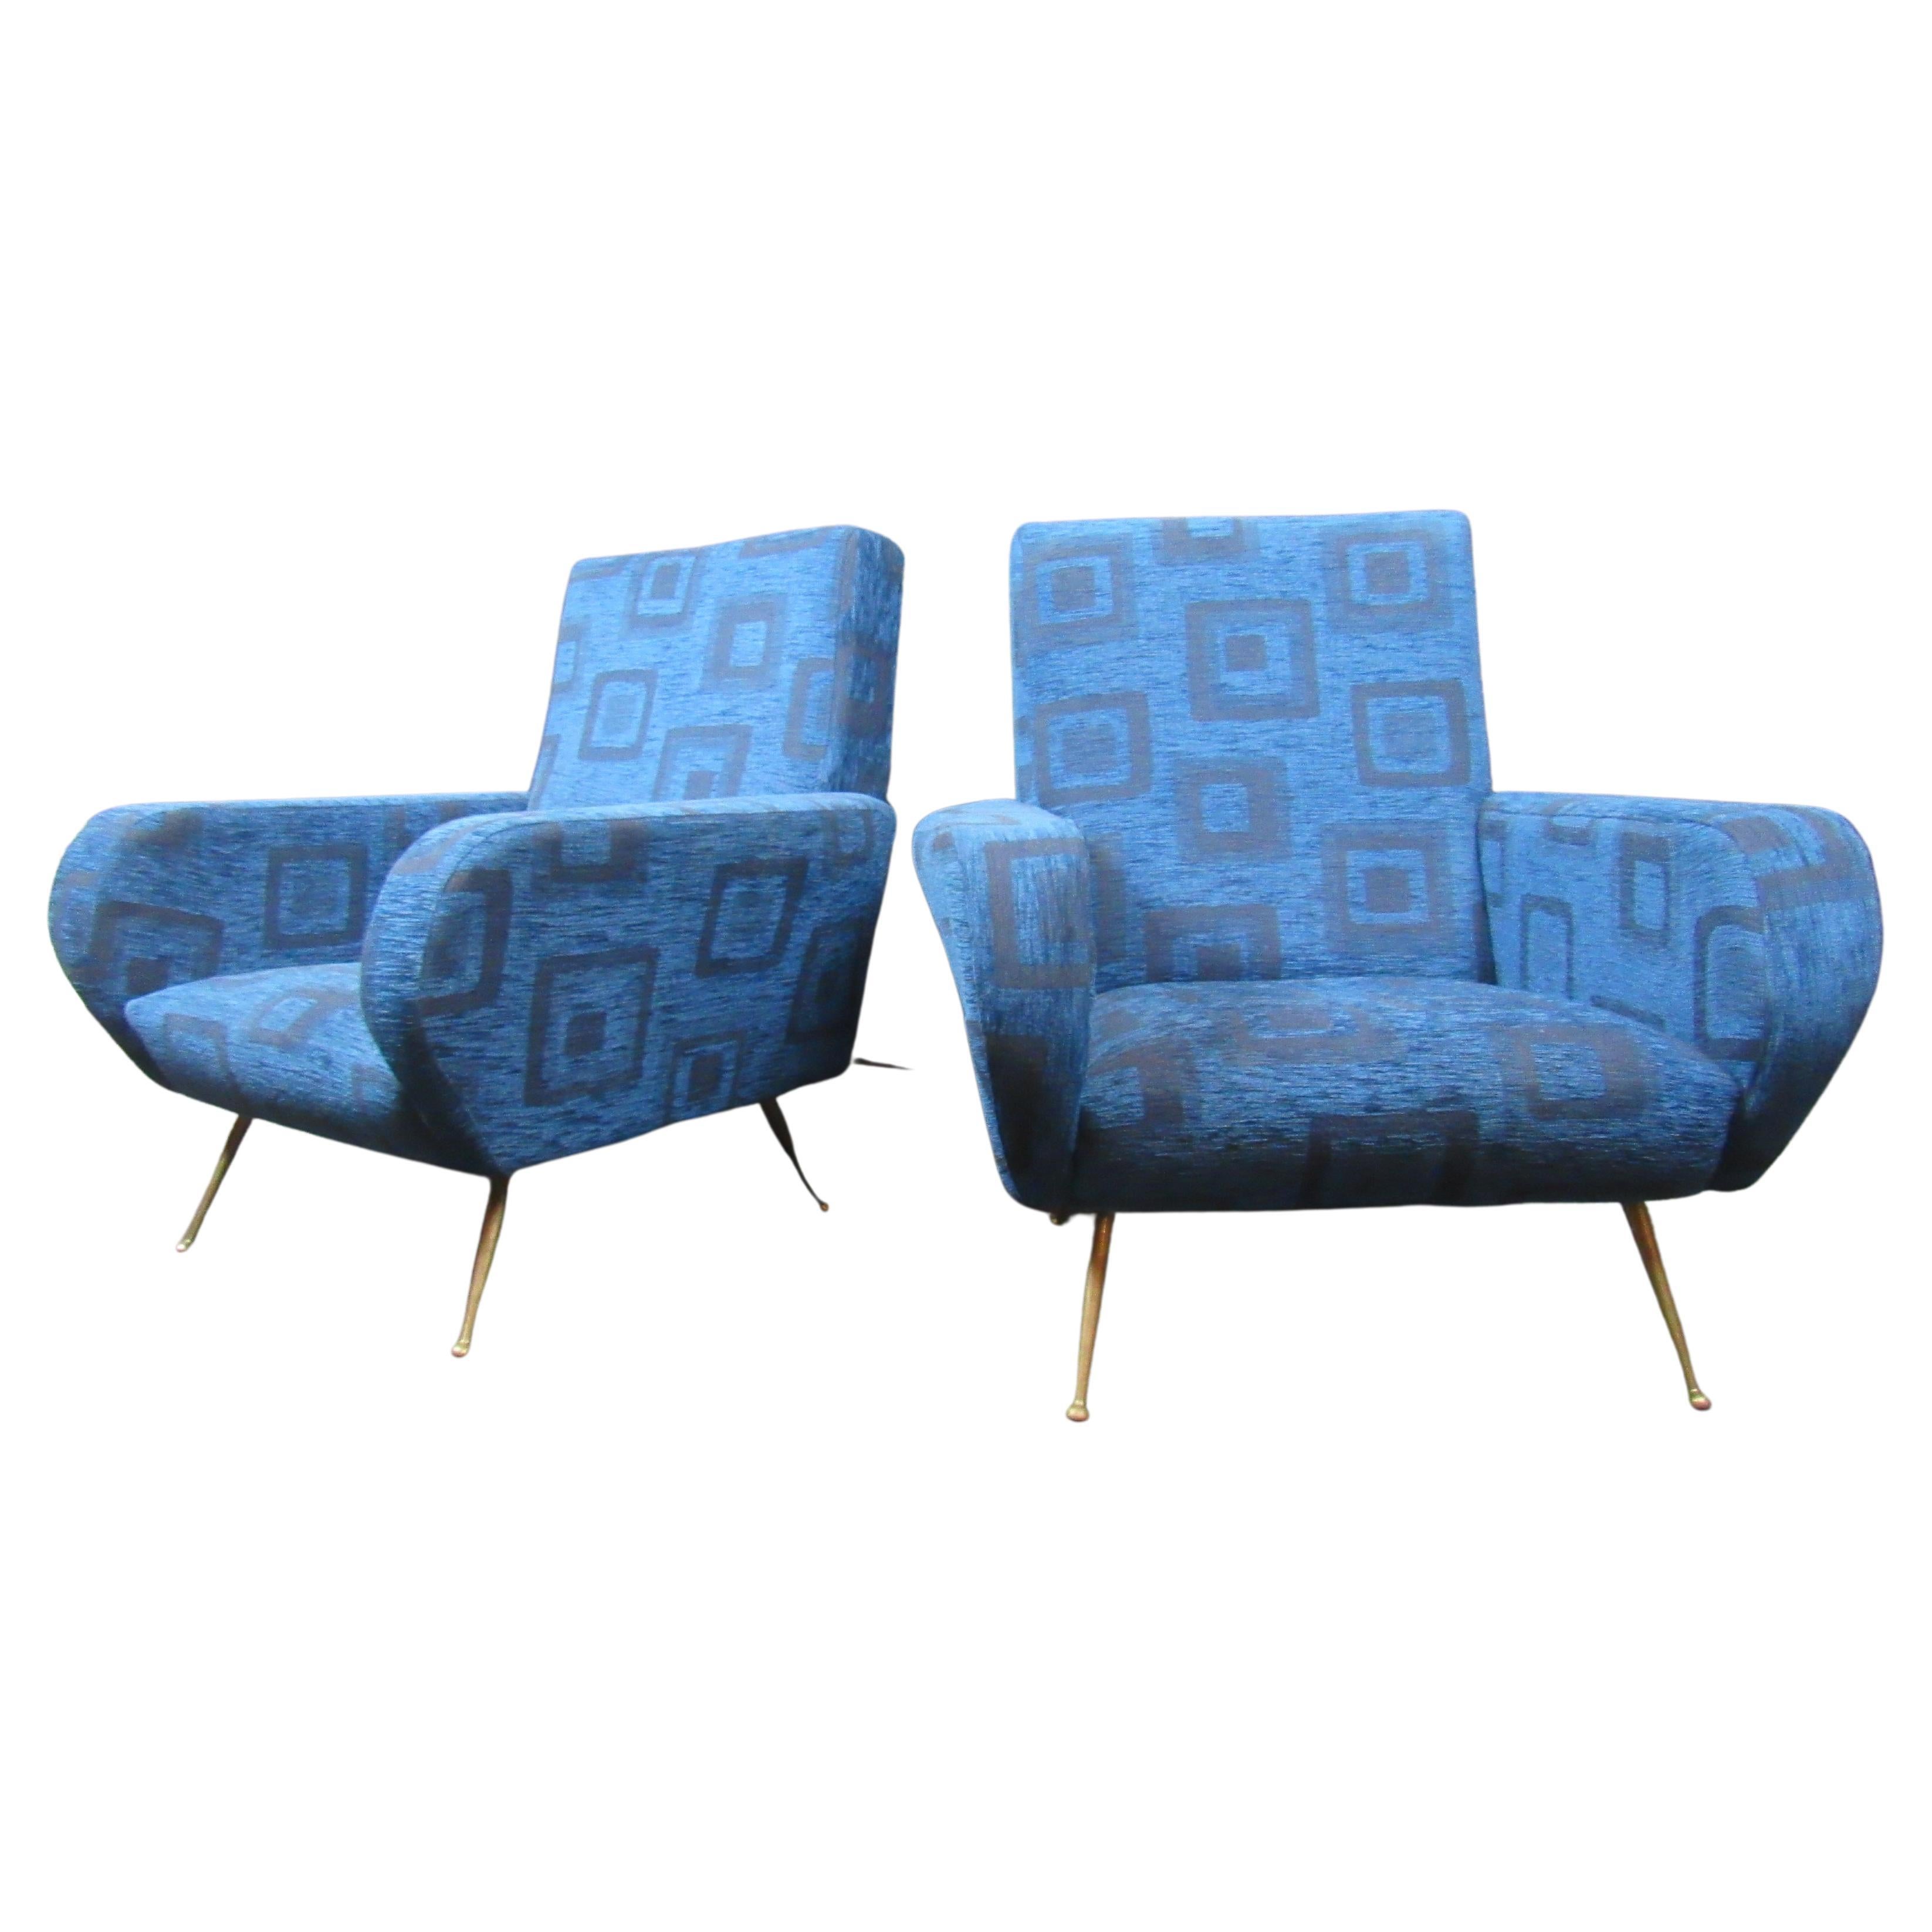 Pair of Vintage Italian Blue Lounge Chairs